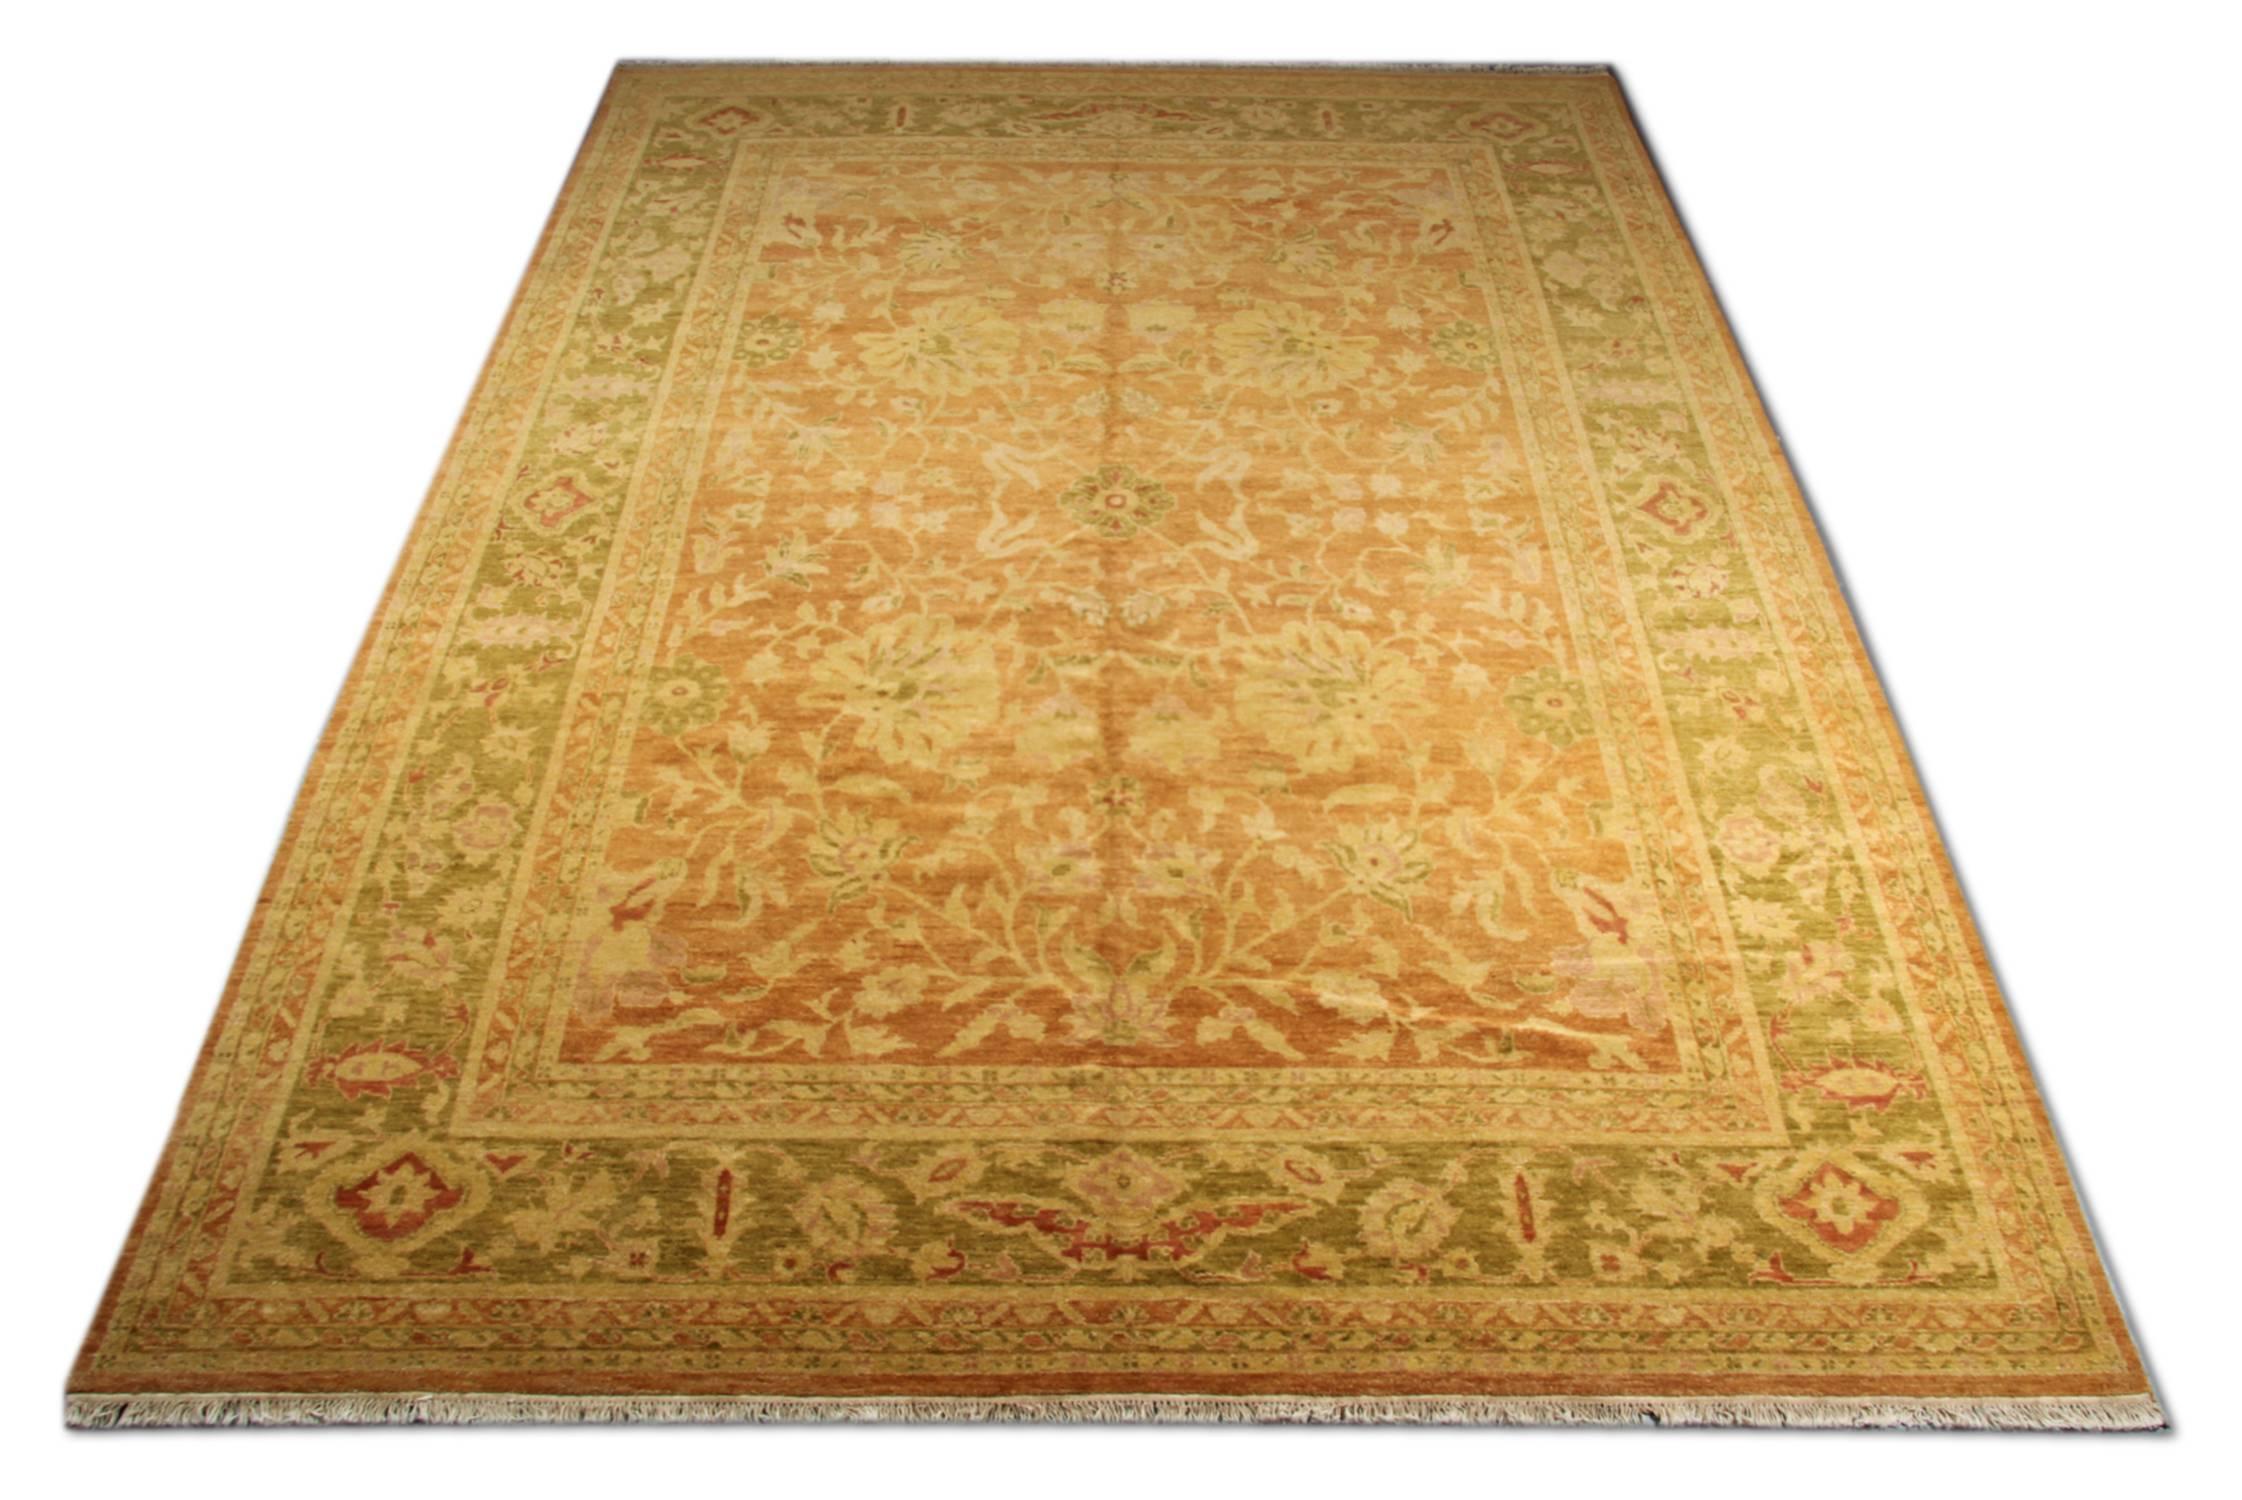 Faithful to the style of many stunning Indian Agra large rugs, this oriental rug masterpiece features an antique rug design. The floral rug combines vibrant colours with elegantly flowing floral motifs to create a sophisticated surface that can add